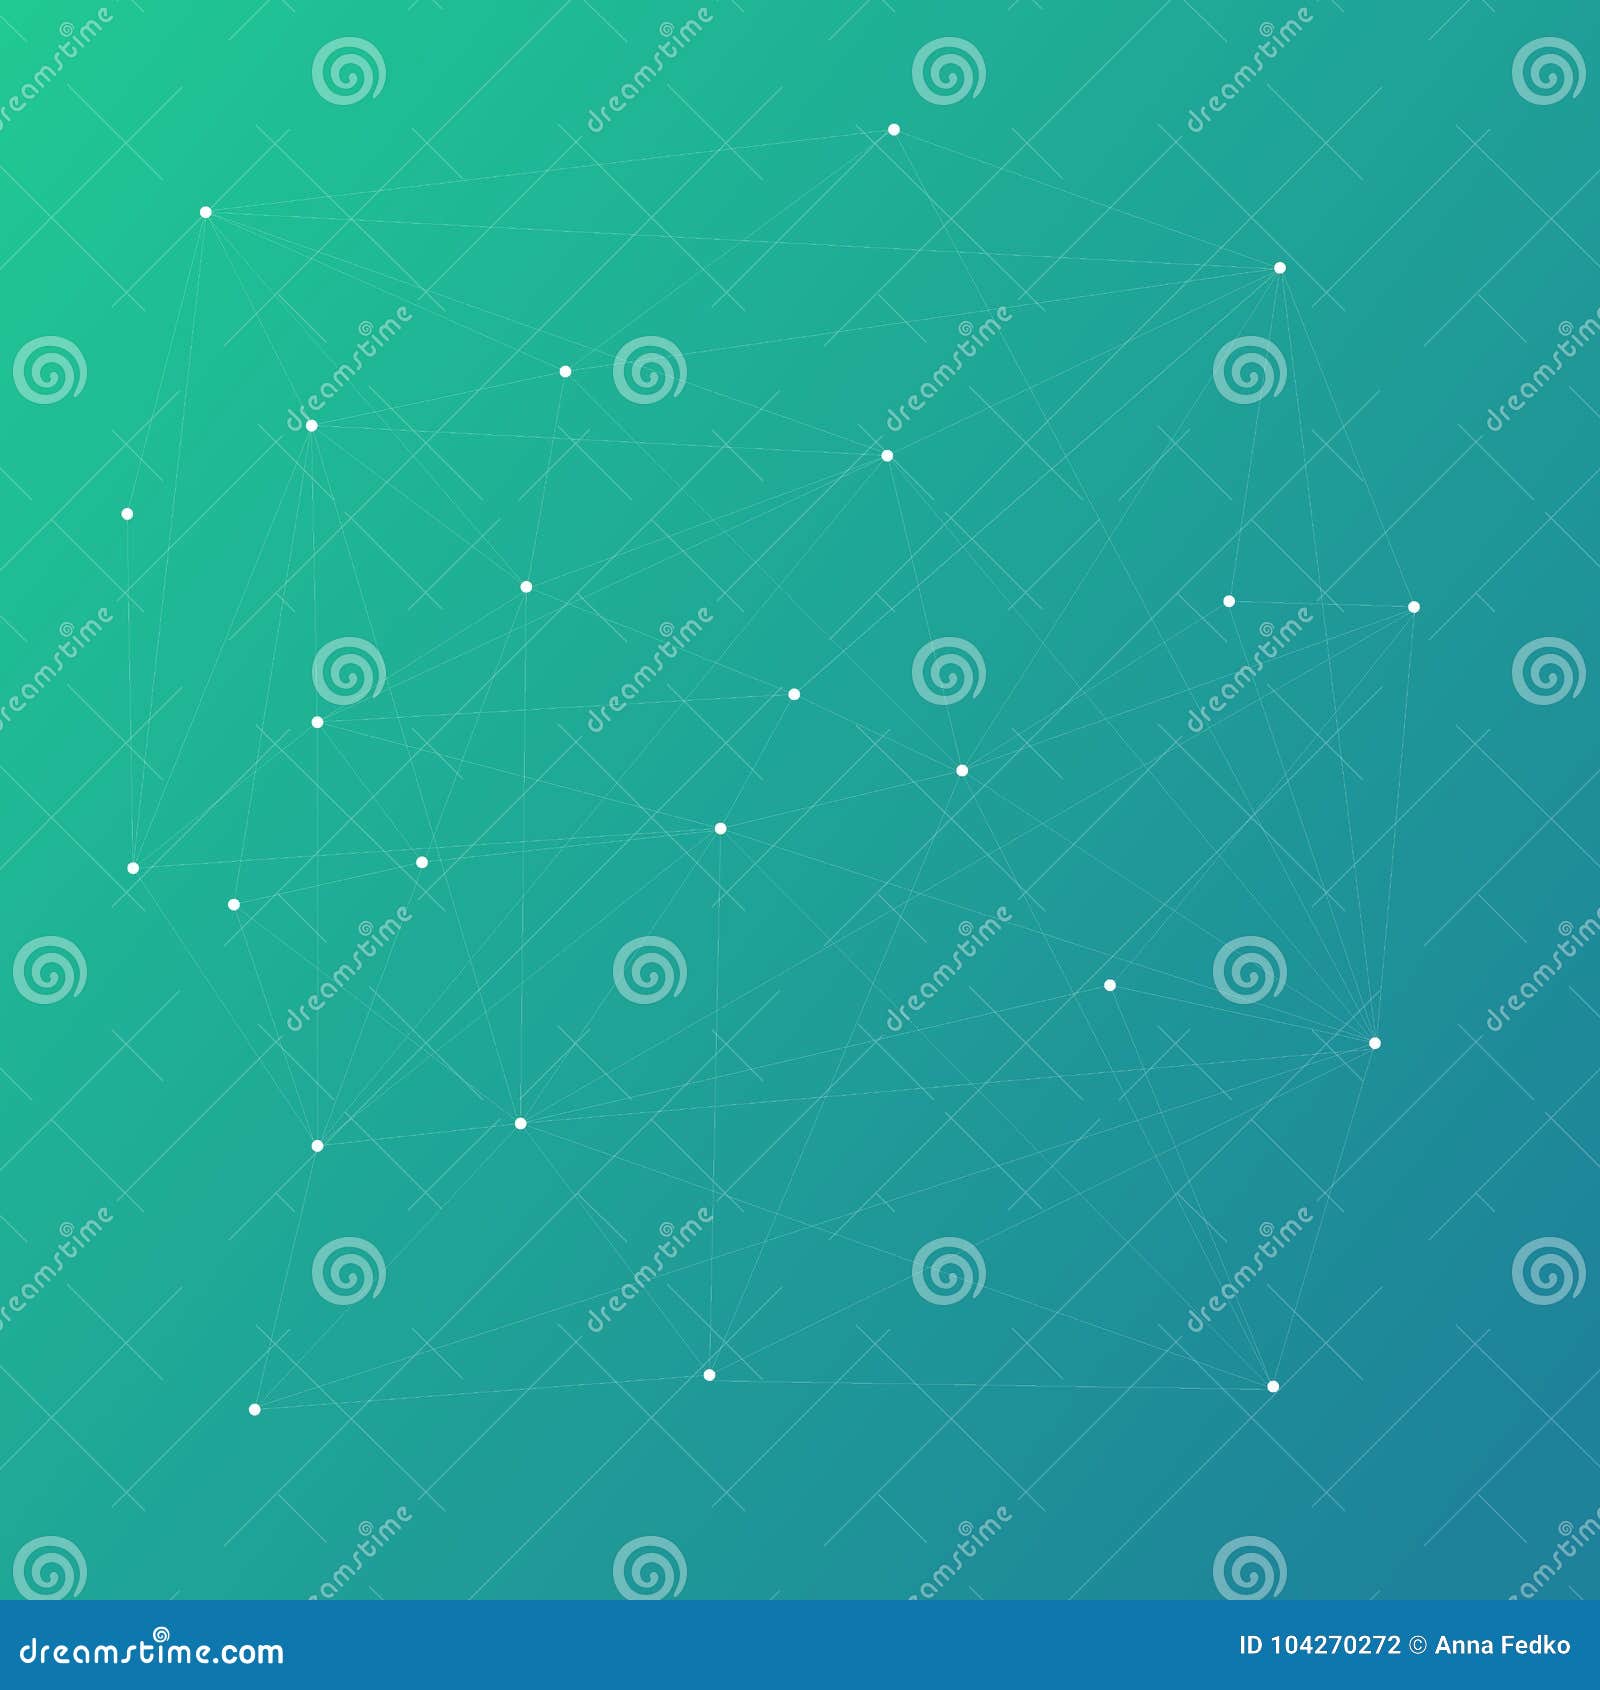 Abstract Polygonal Mash Gradient Background with Connecting Dots and ...